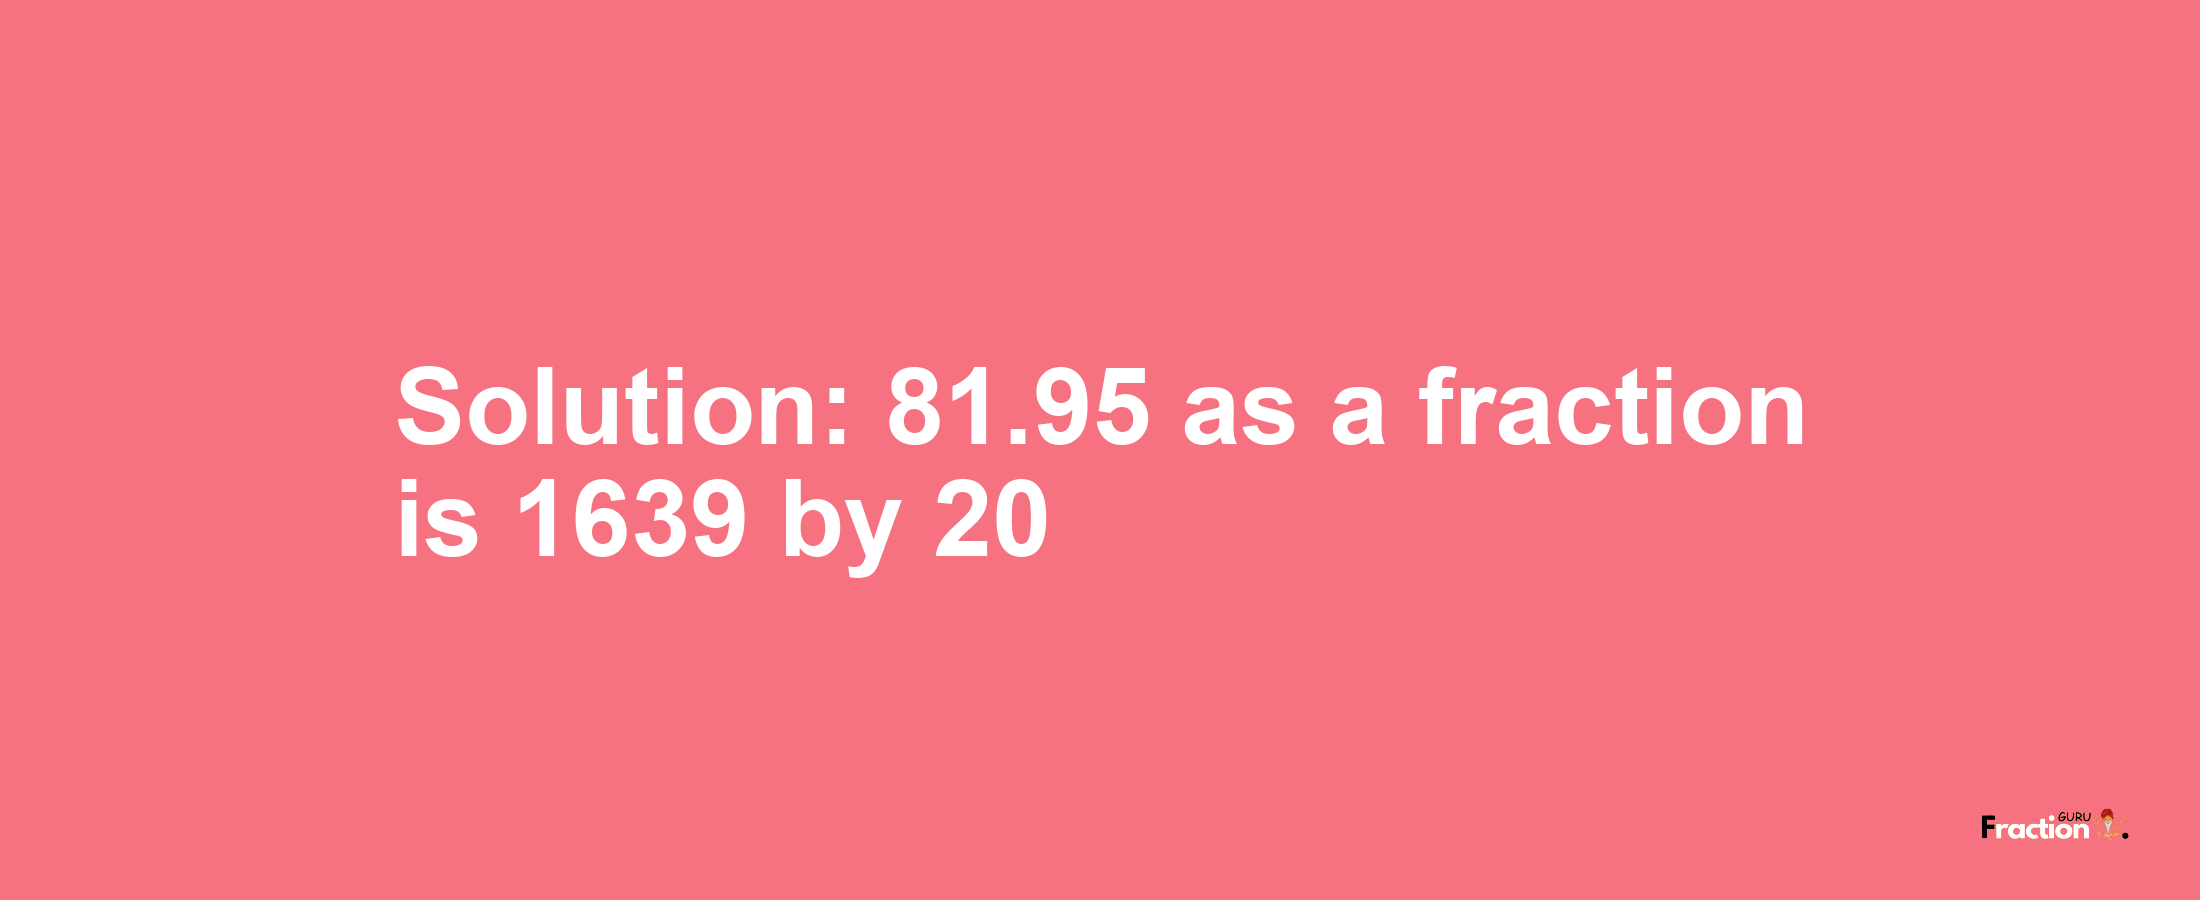 Solution:81.95 as a fraction is 1639/20